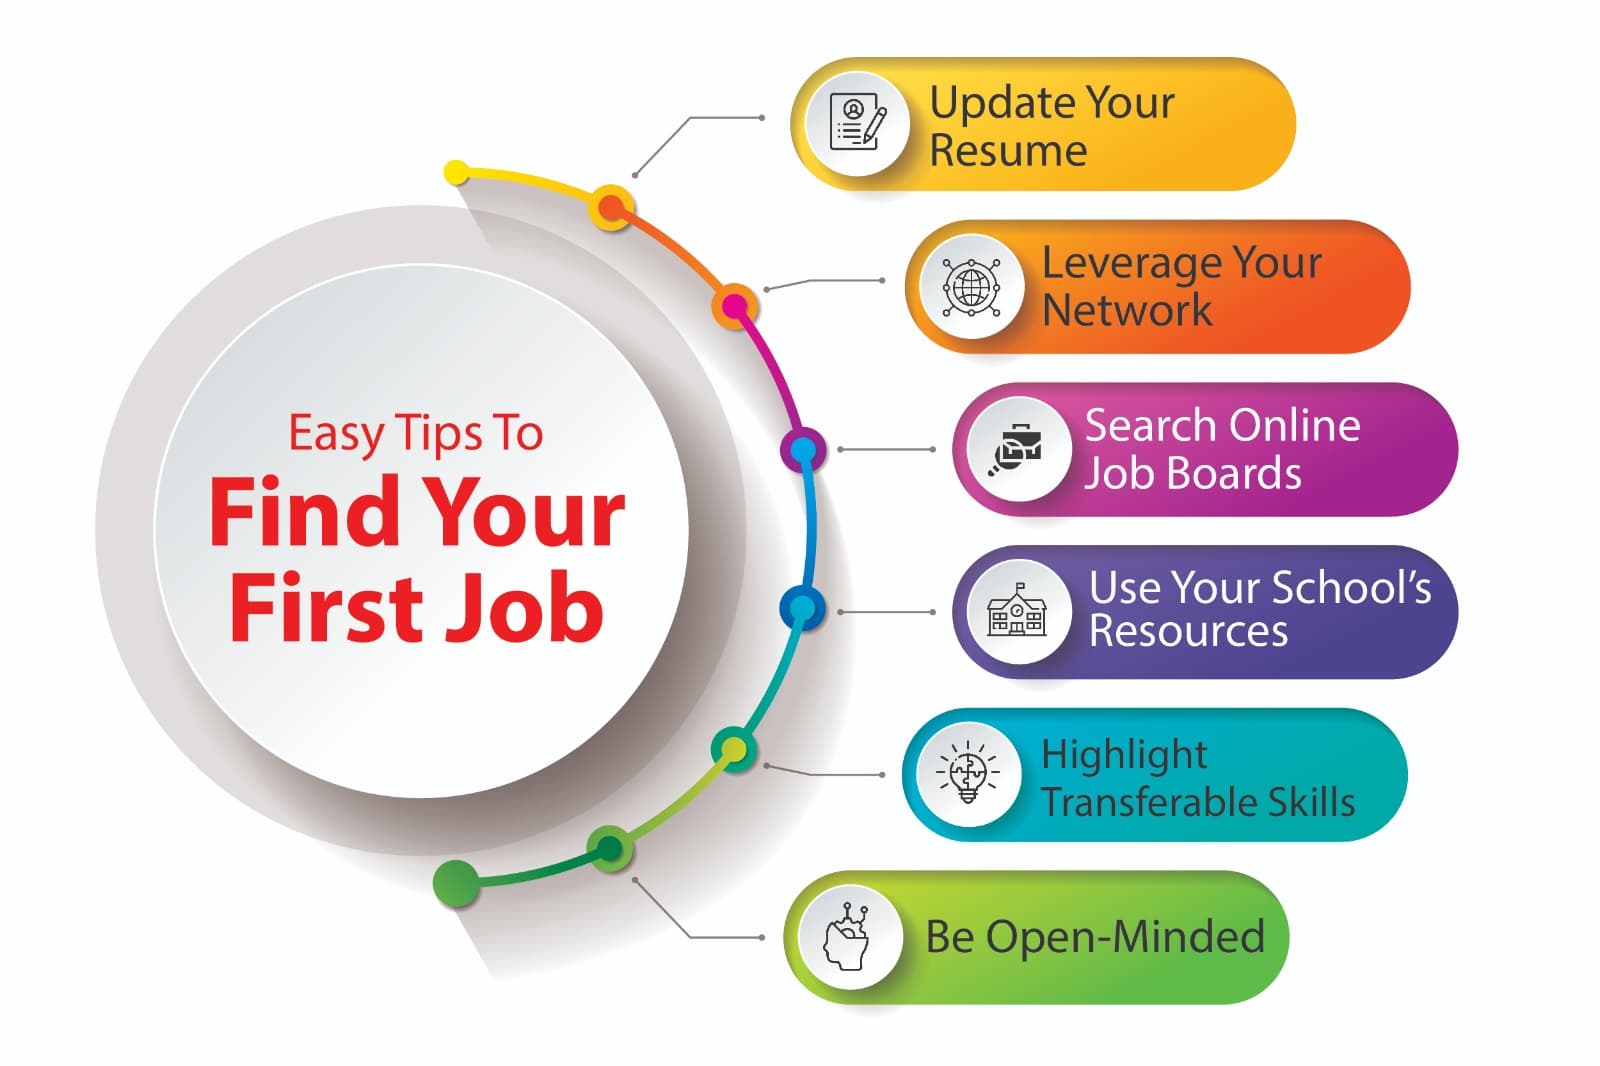 Easy Tips To Find Your First Job